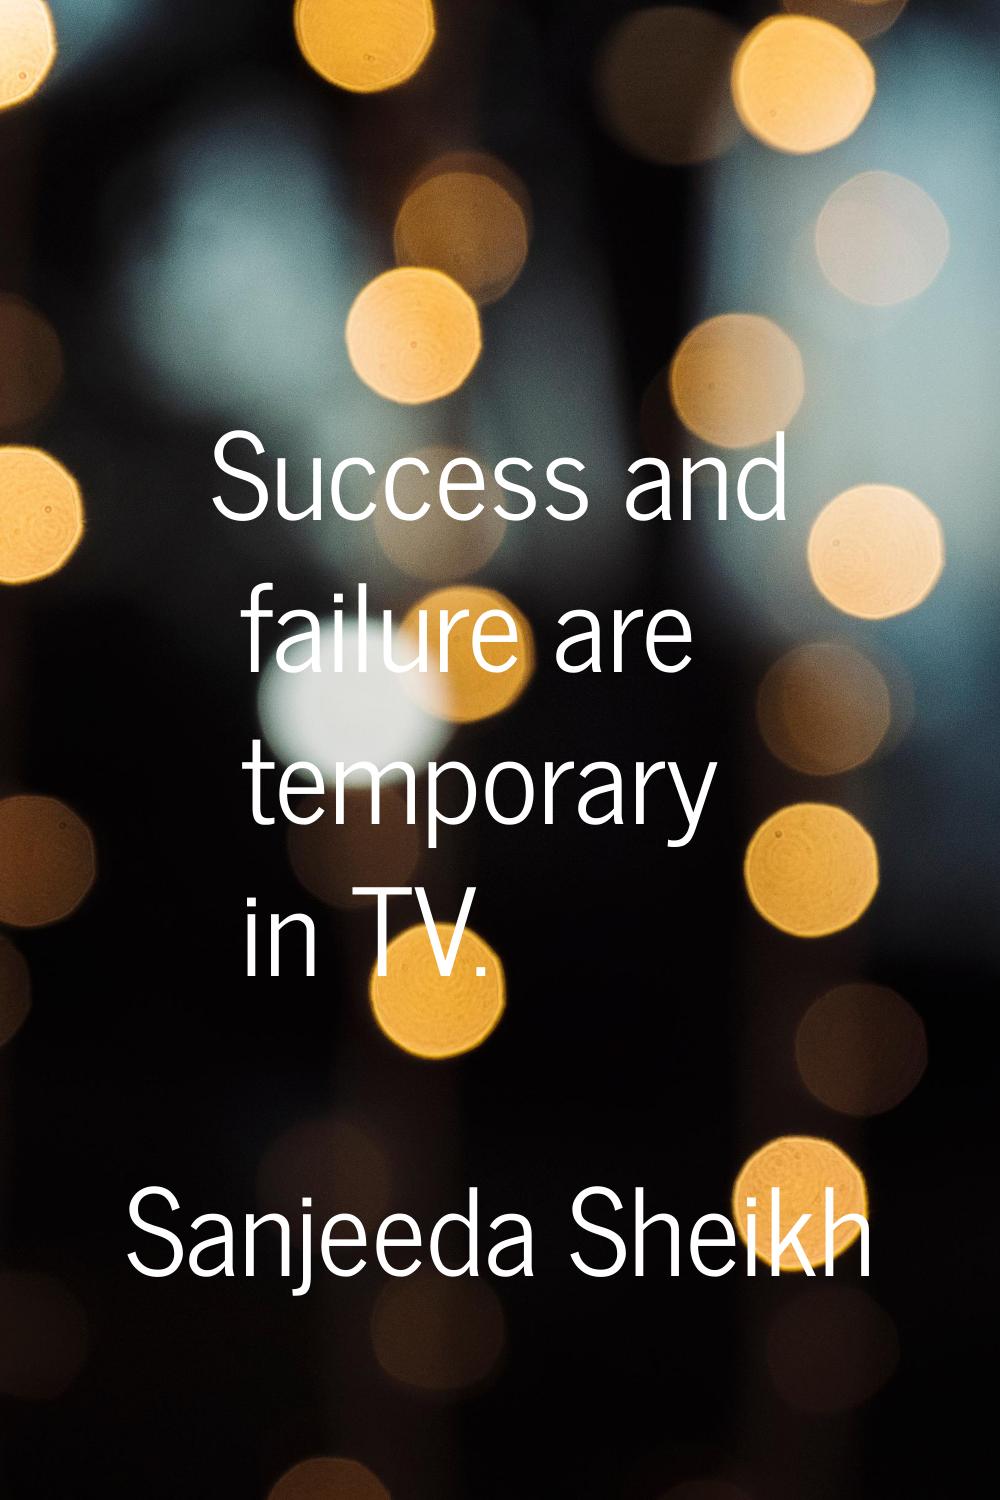 Success and failure are temporary in TV.